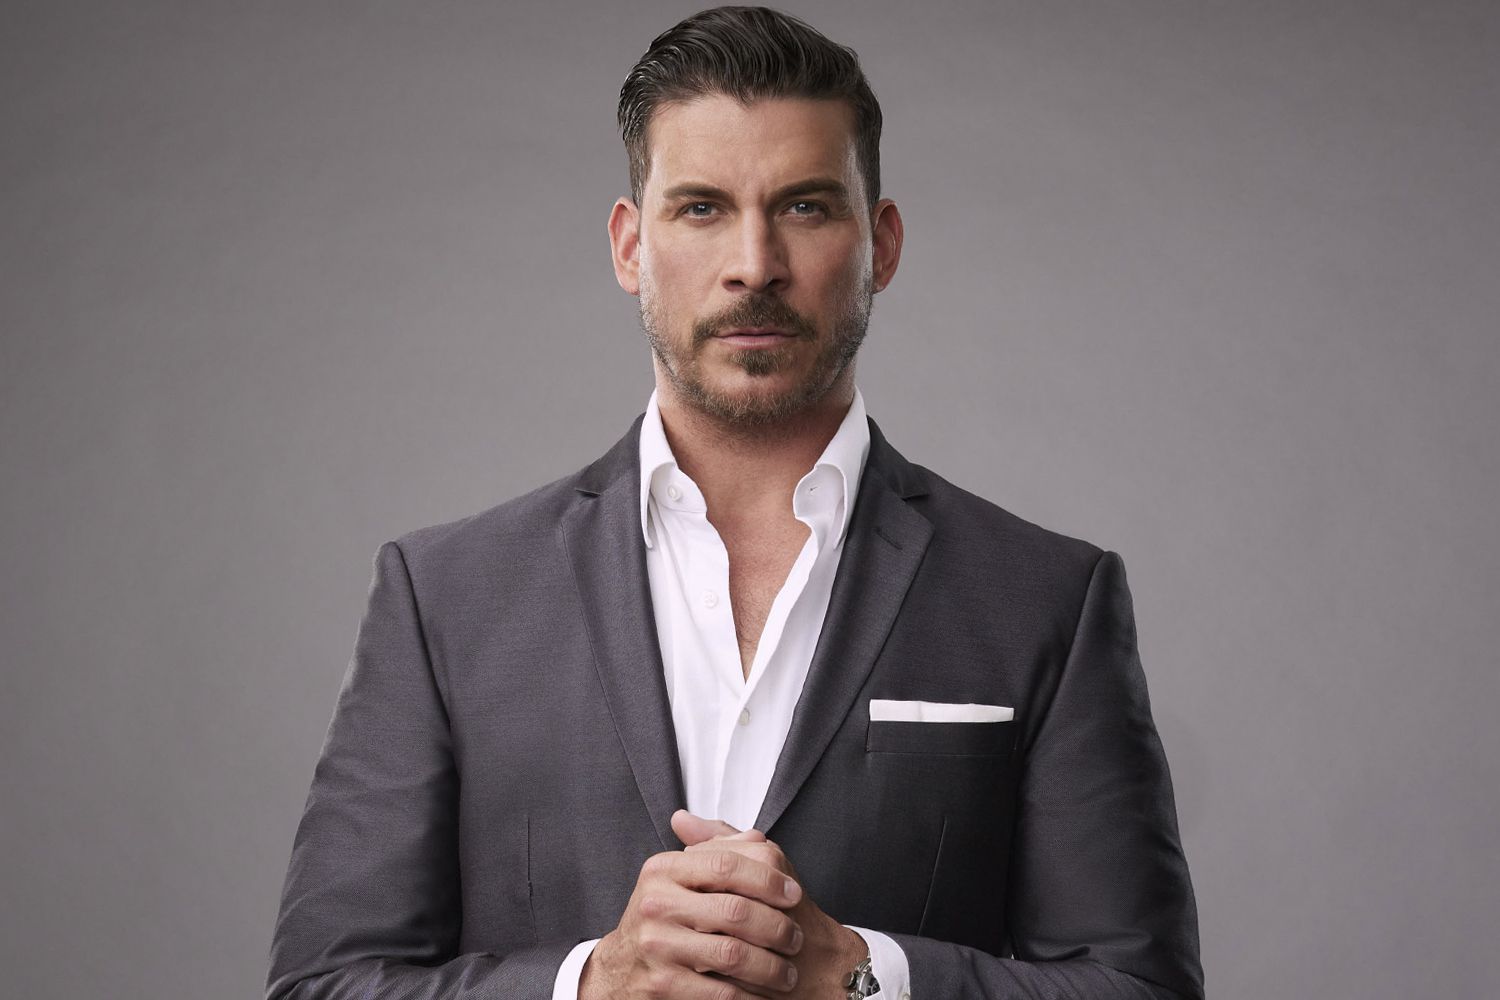 clarence noble recommends jax taylor nude pic